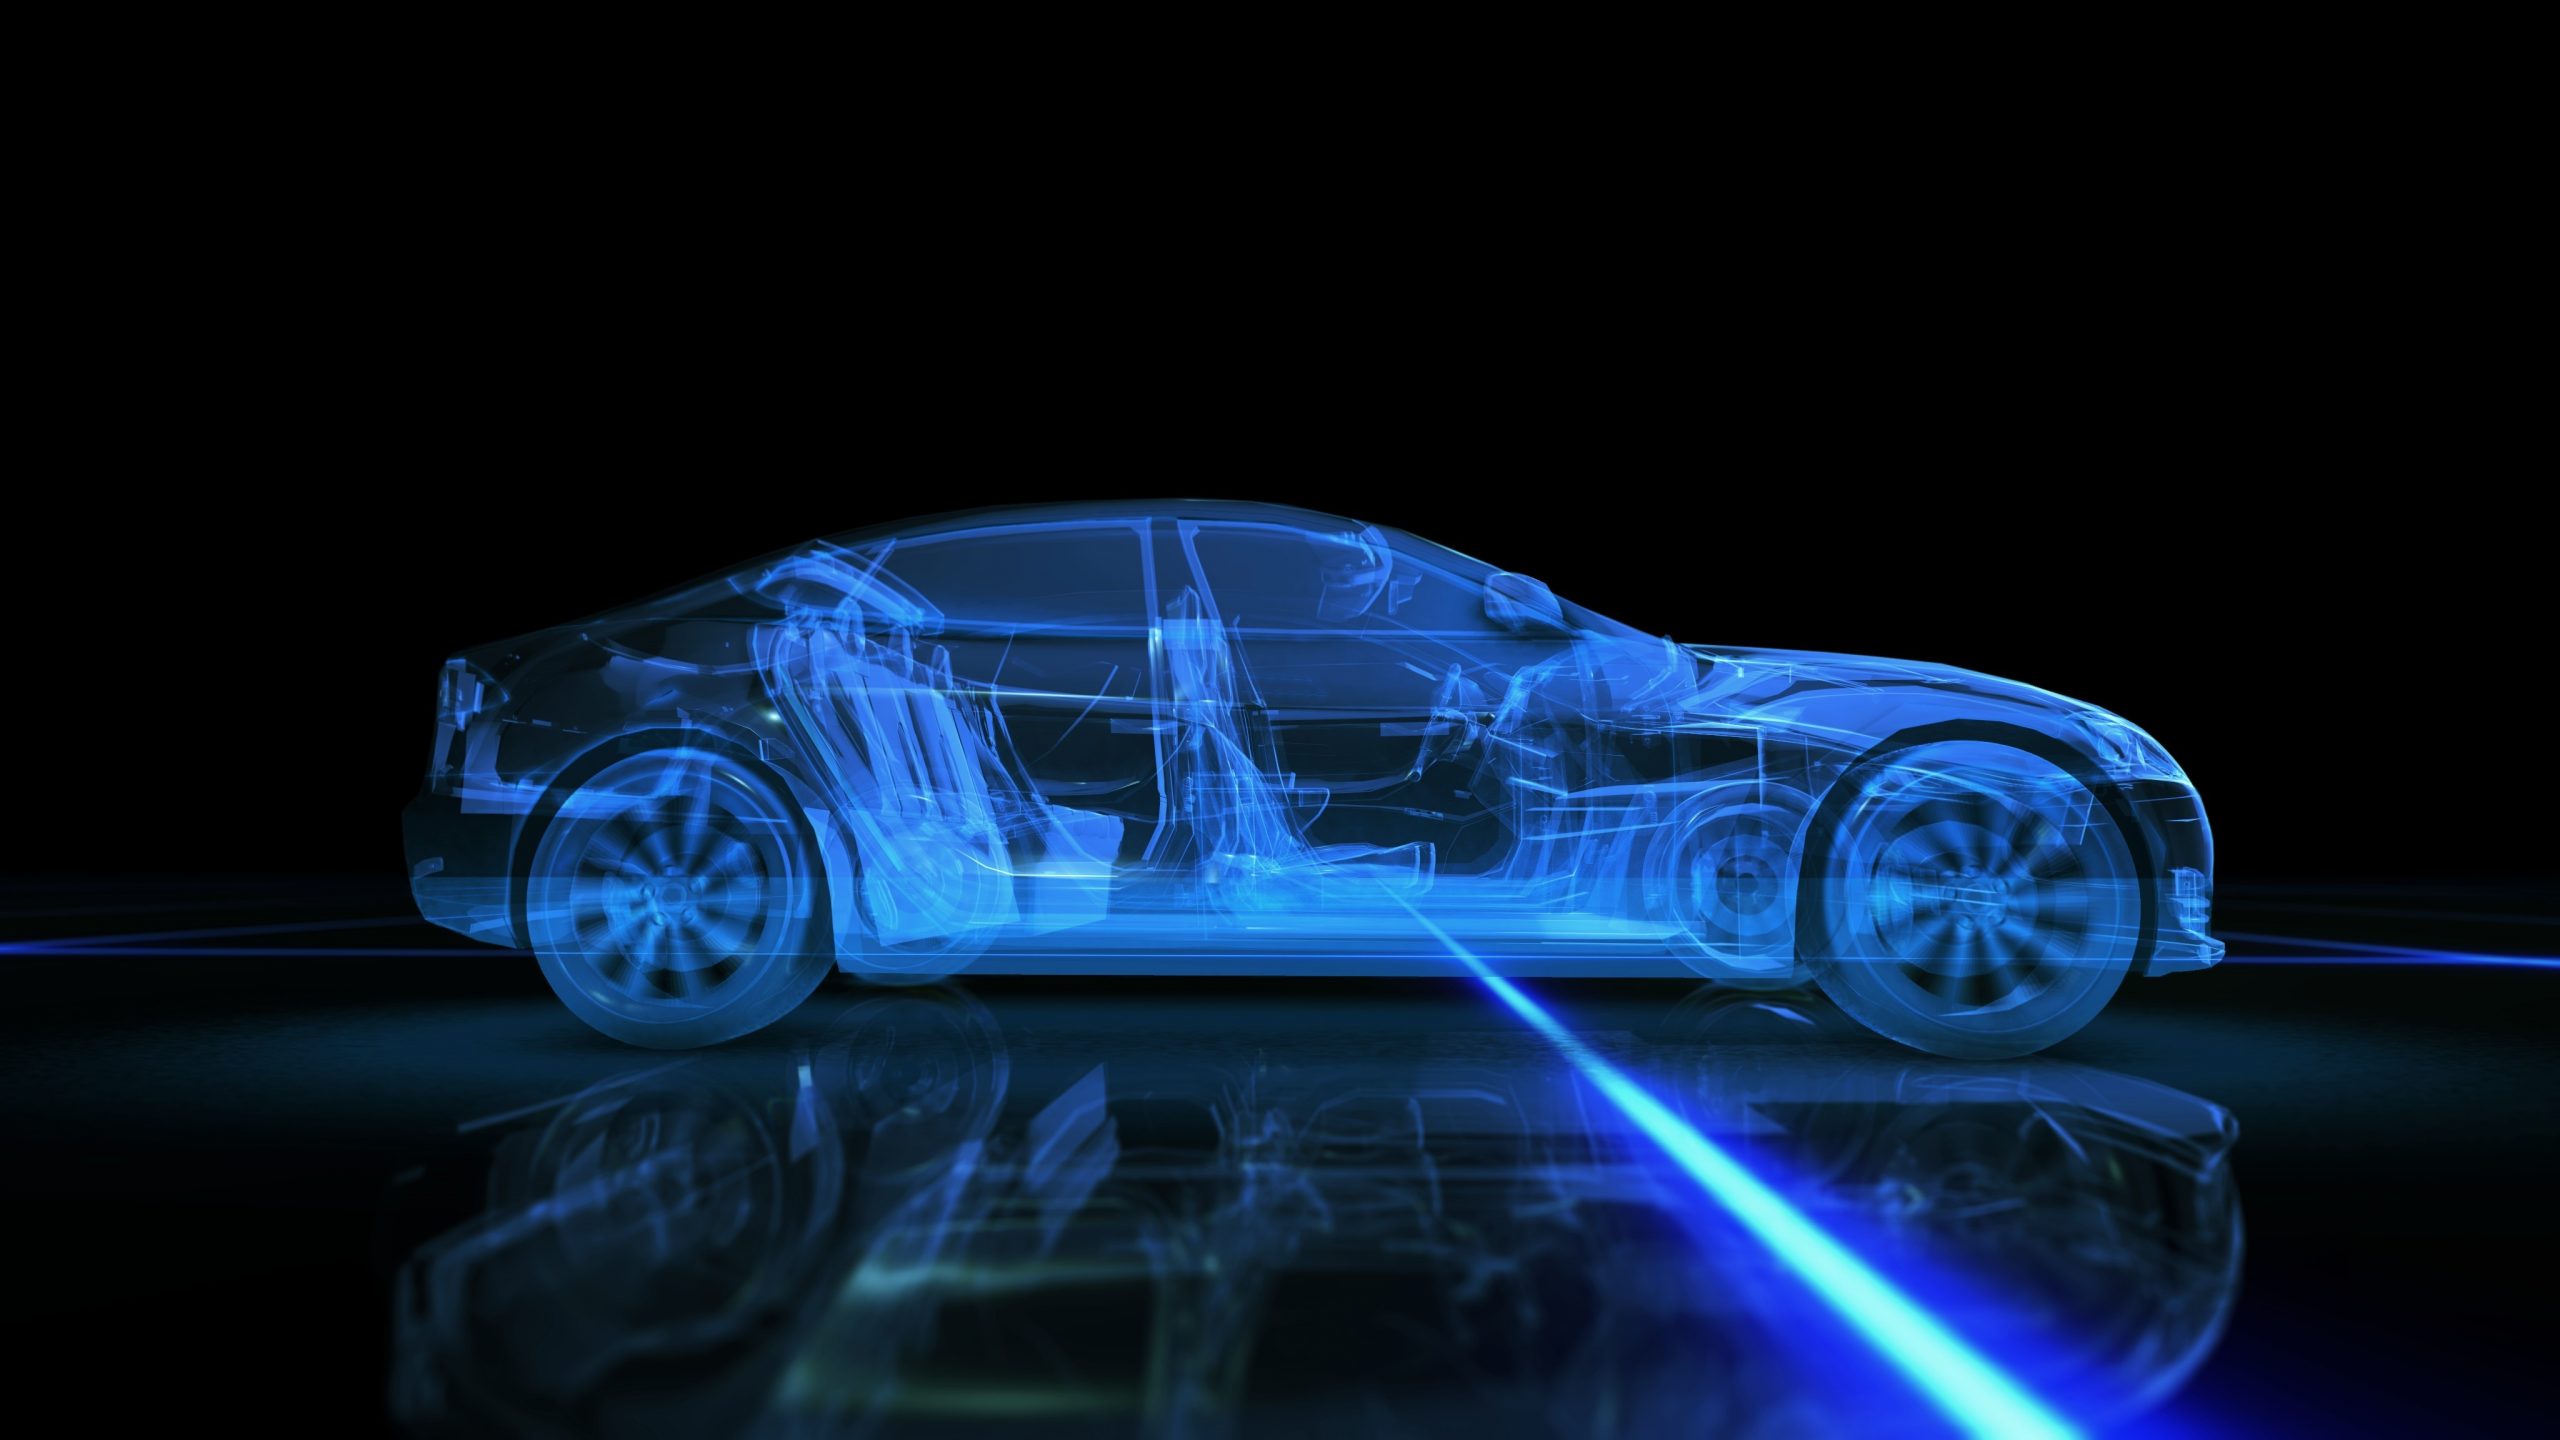  A blue, semi-transparent car with self-driving technology features drives on a black surface with a blue light trail.